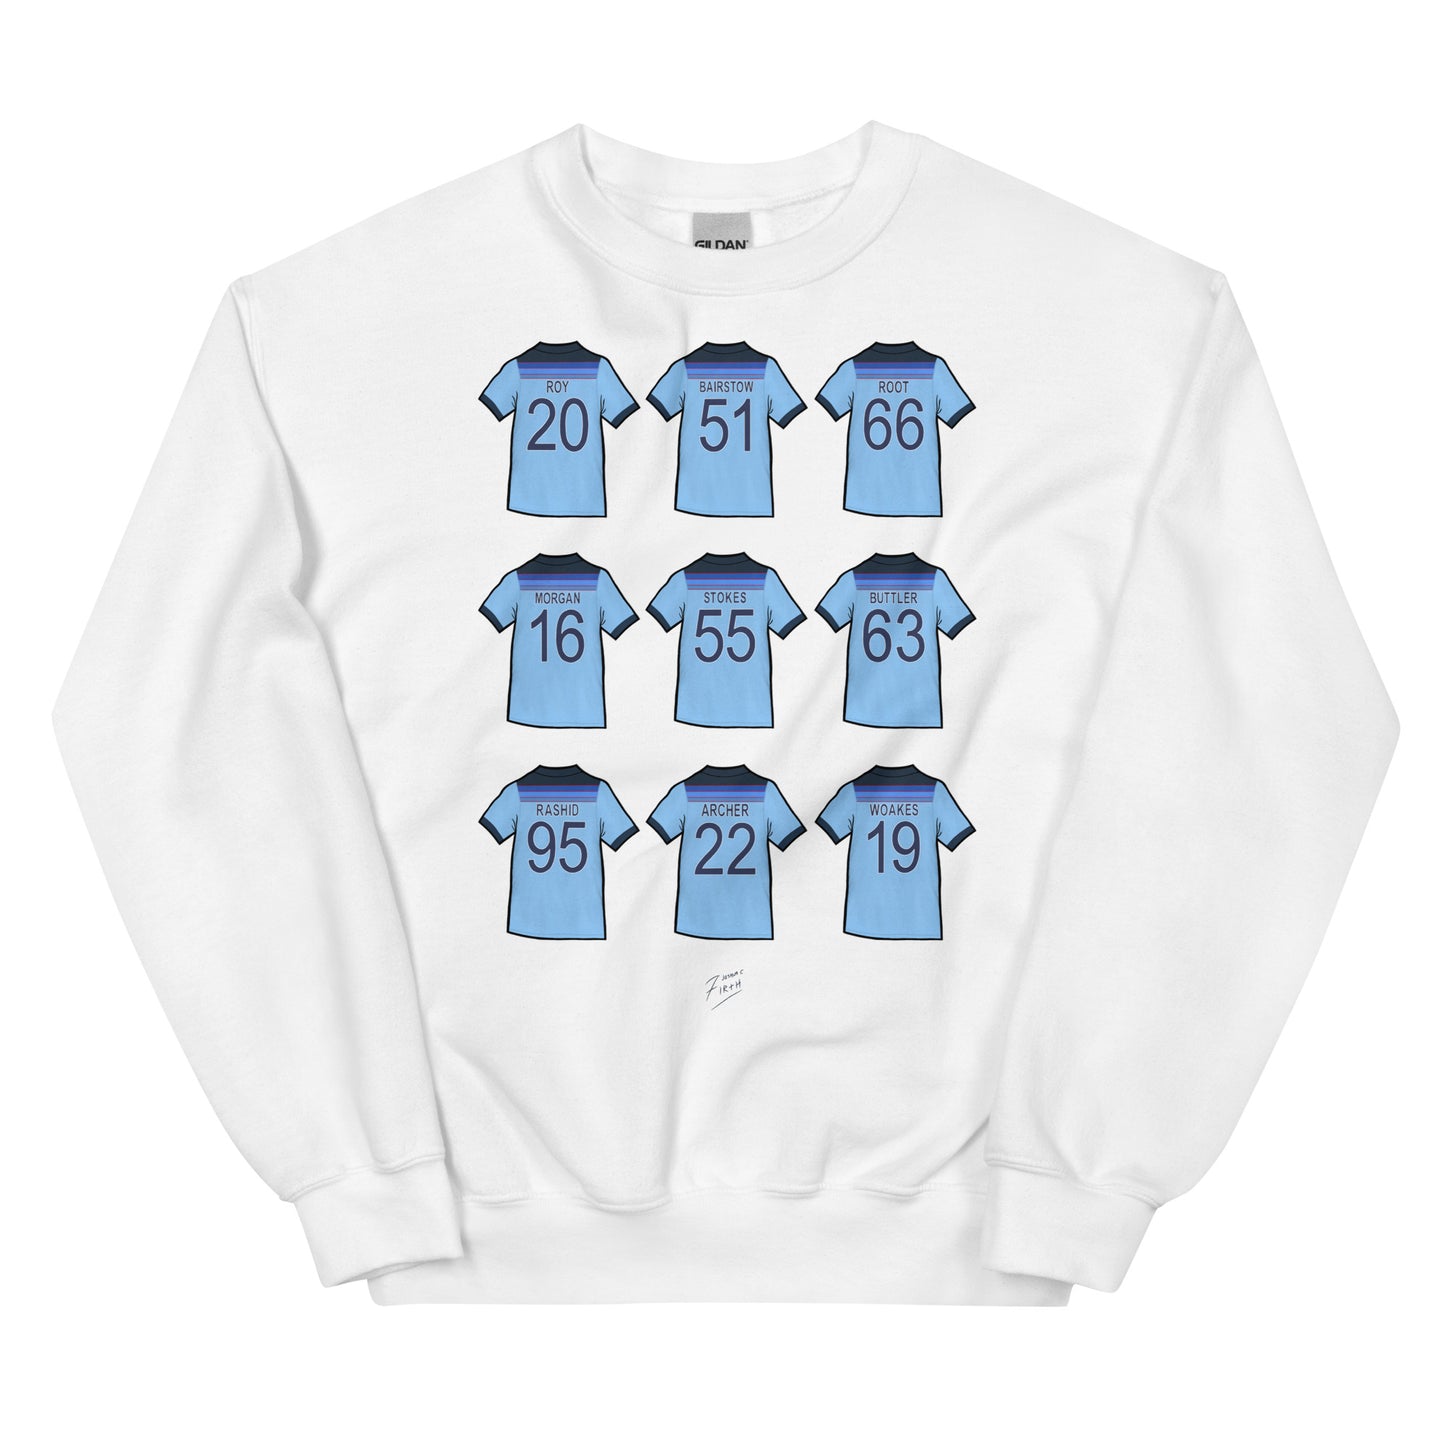 White T-shirt England cricket sweatshirt jumper inspired by those jerseys of world cup 2019